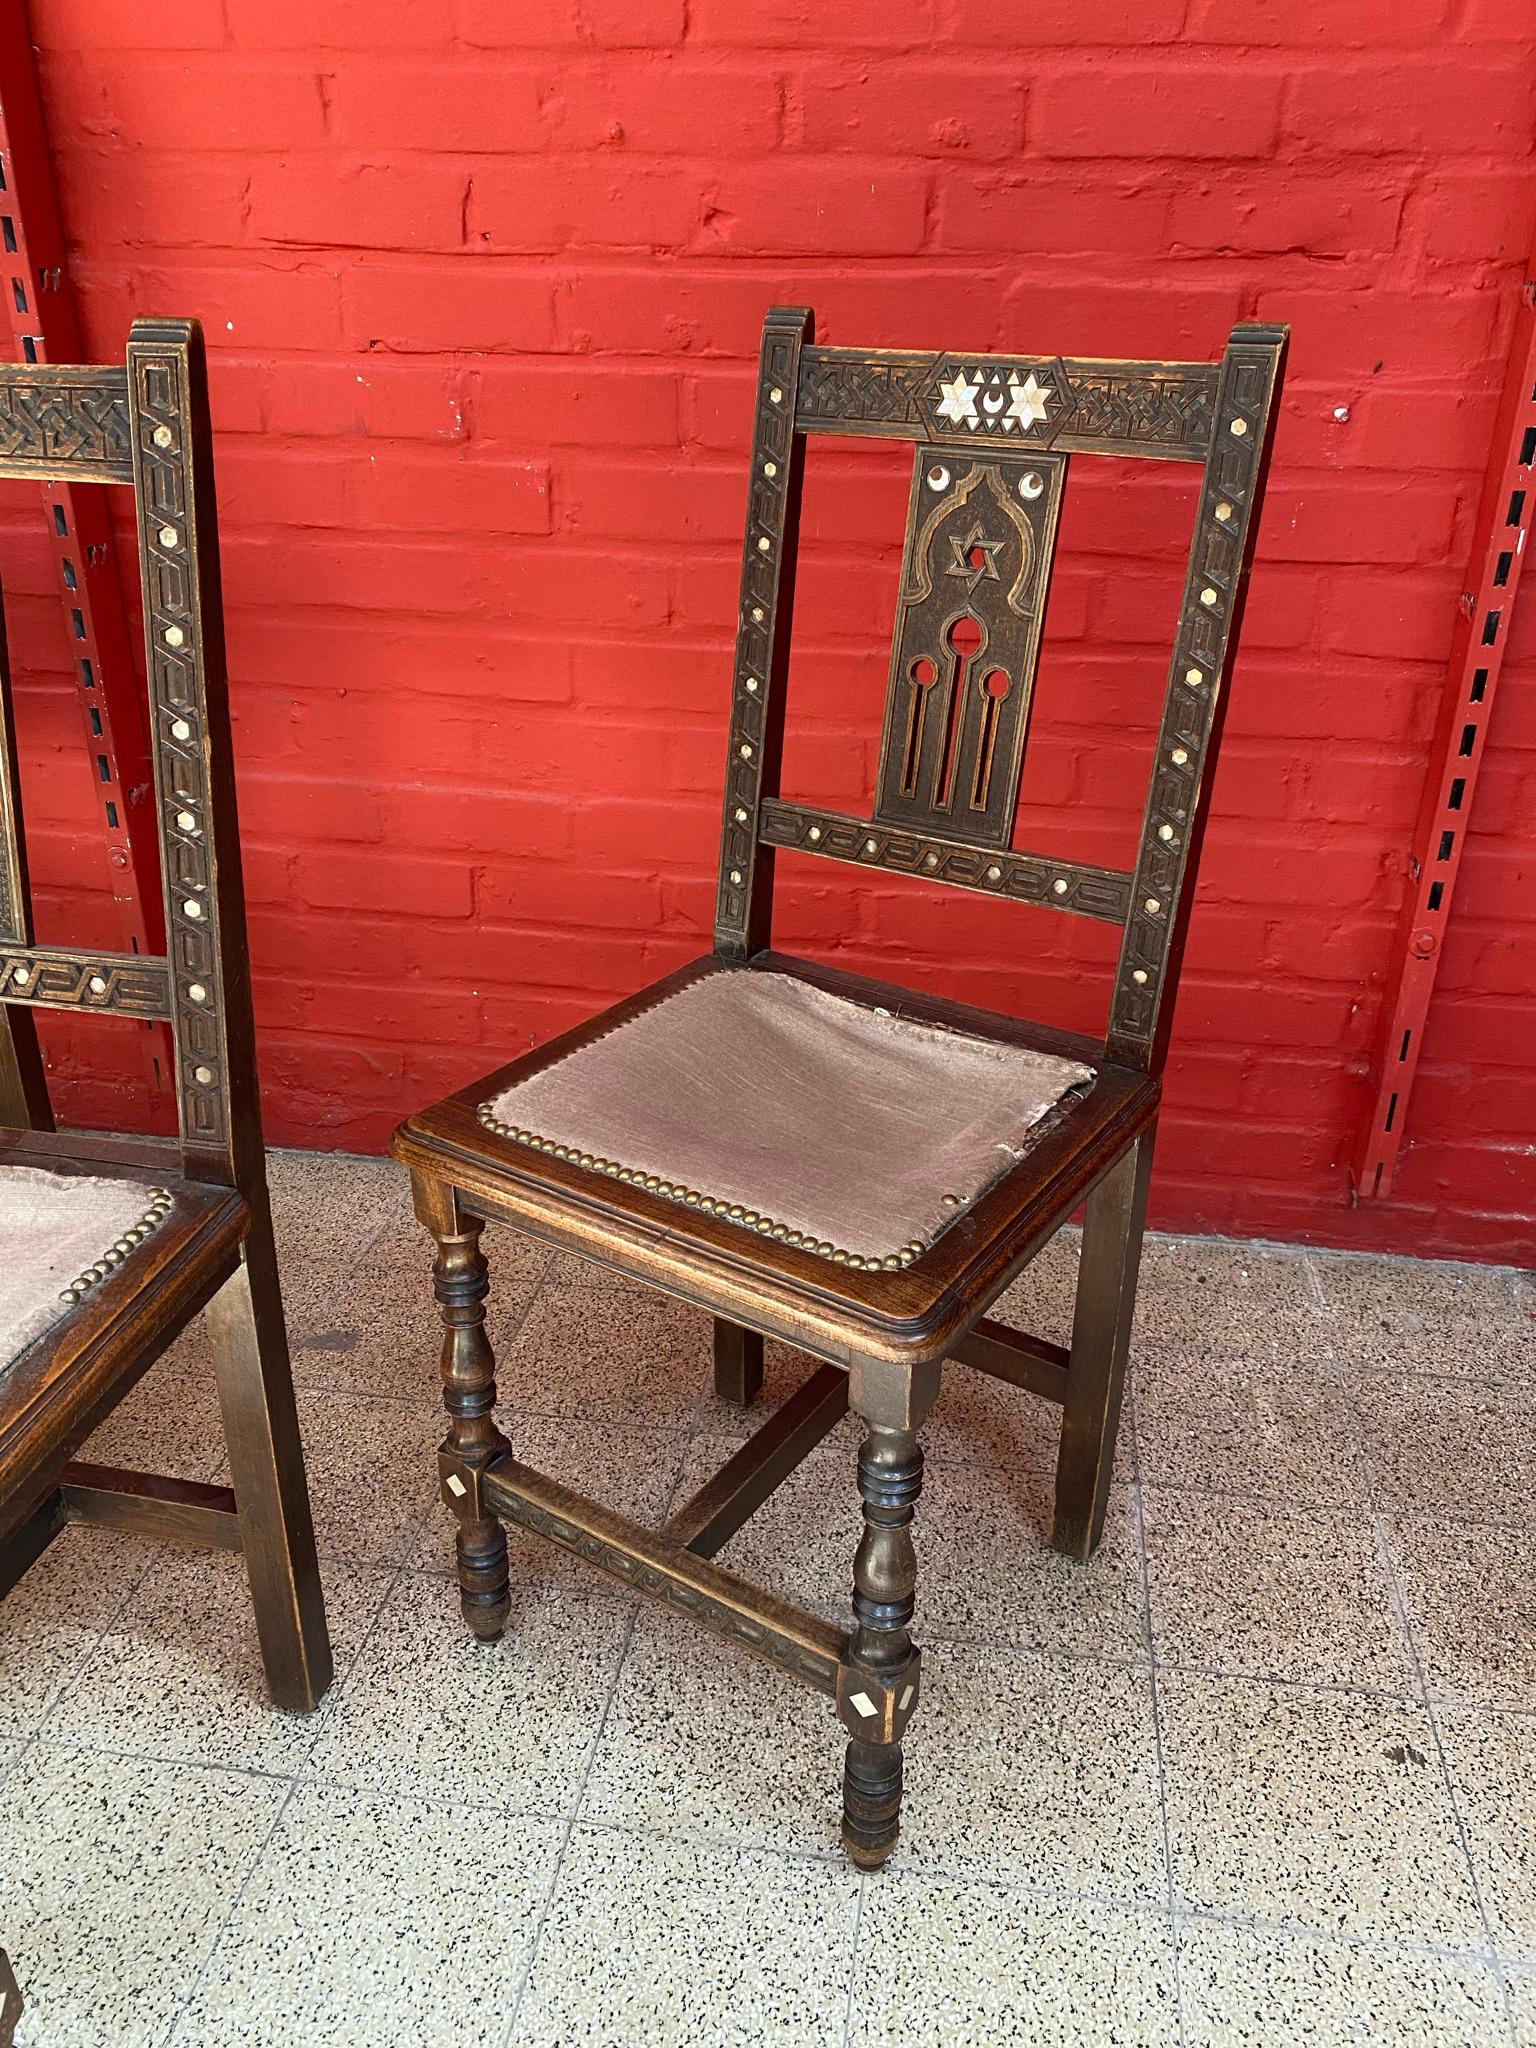 Algerian Set of 6 Oriental-Style Chairs in Carved Wood, with Mother-of-Pearl Inlay, 1880